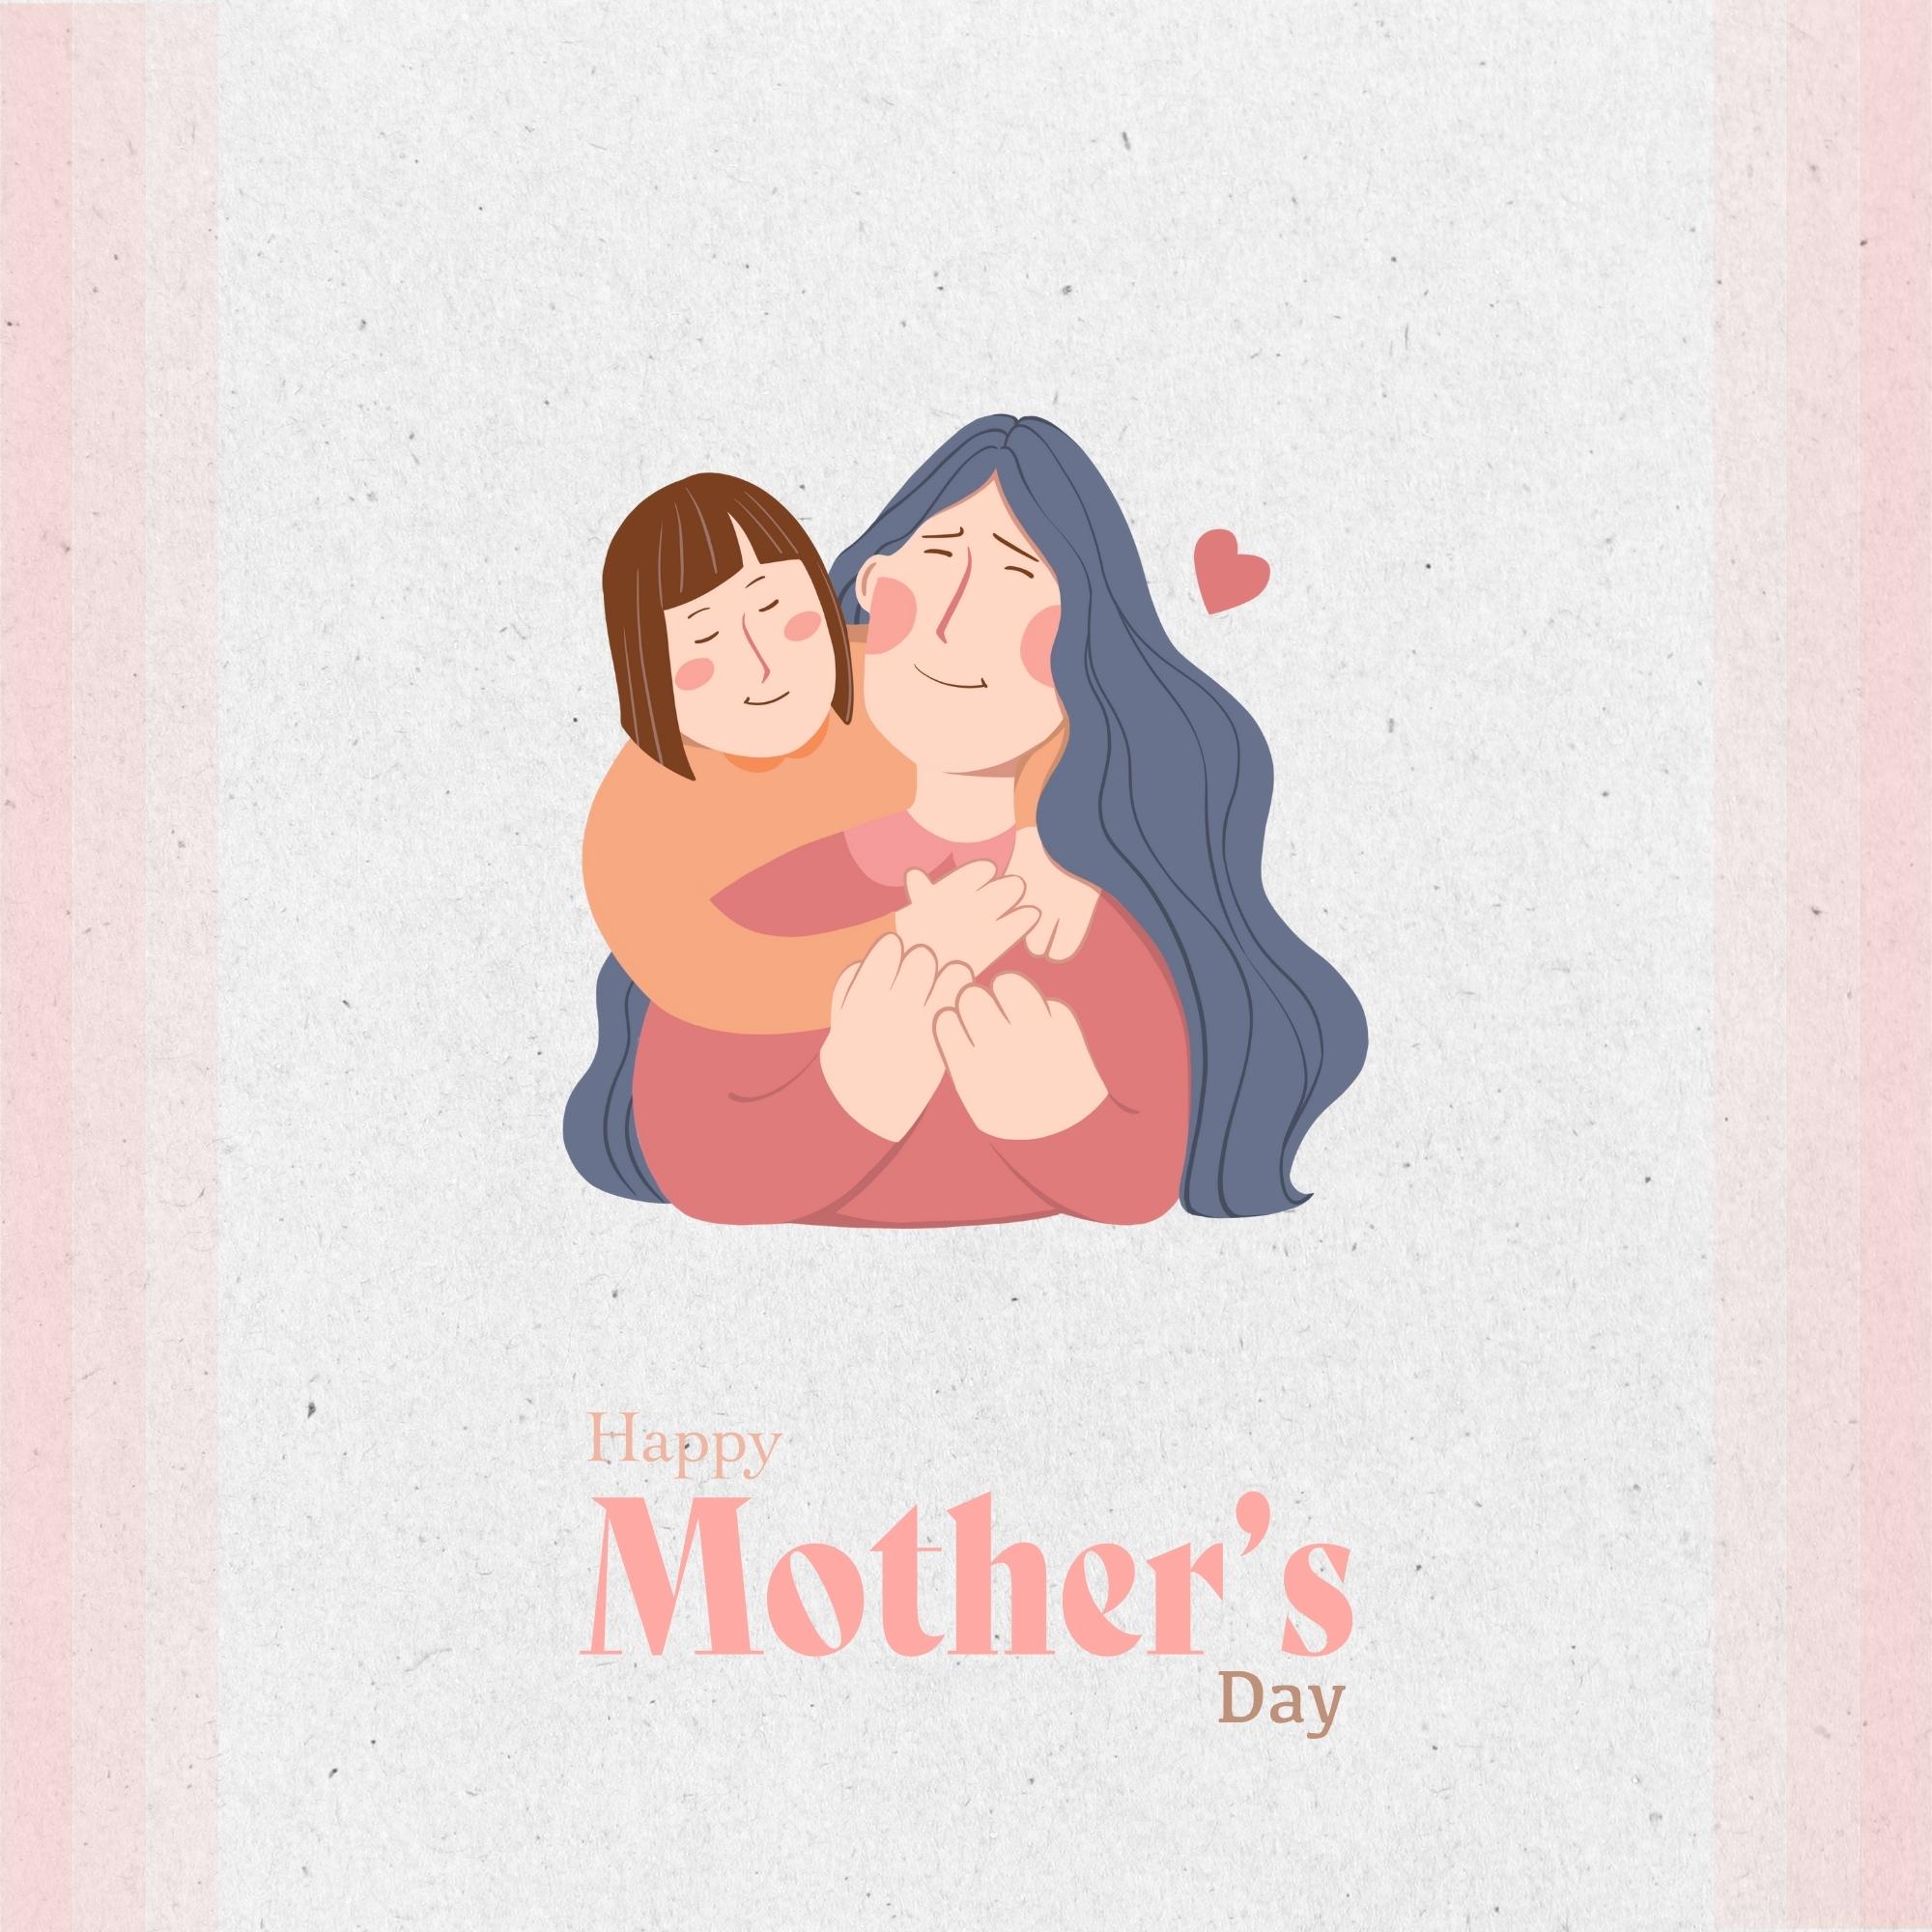 Happy Mothers Day Images 988 Free Download 8k4kHd full HD free download.